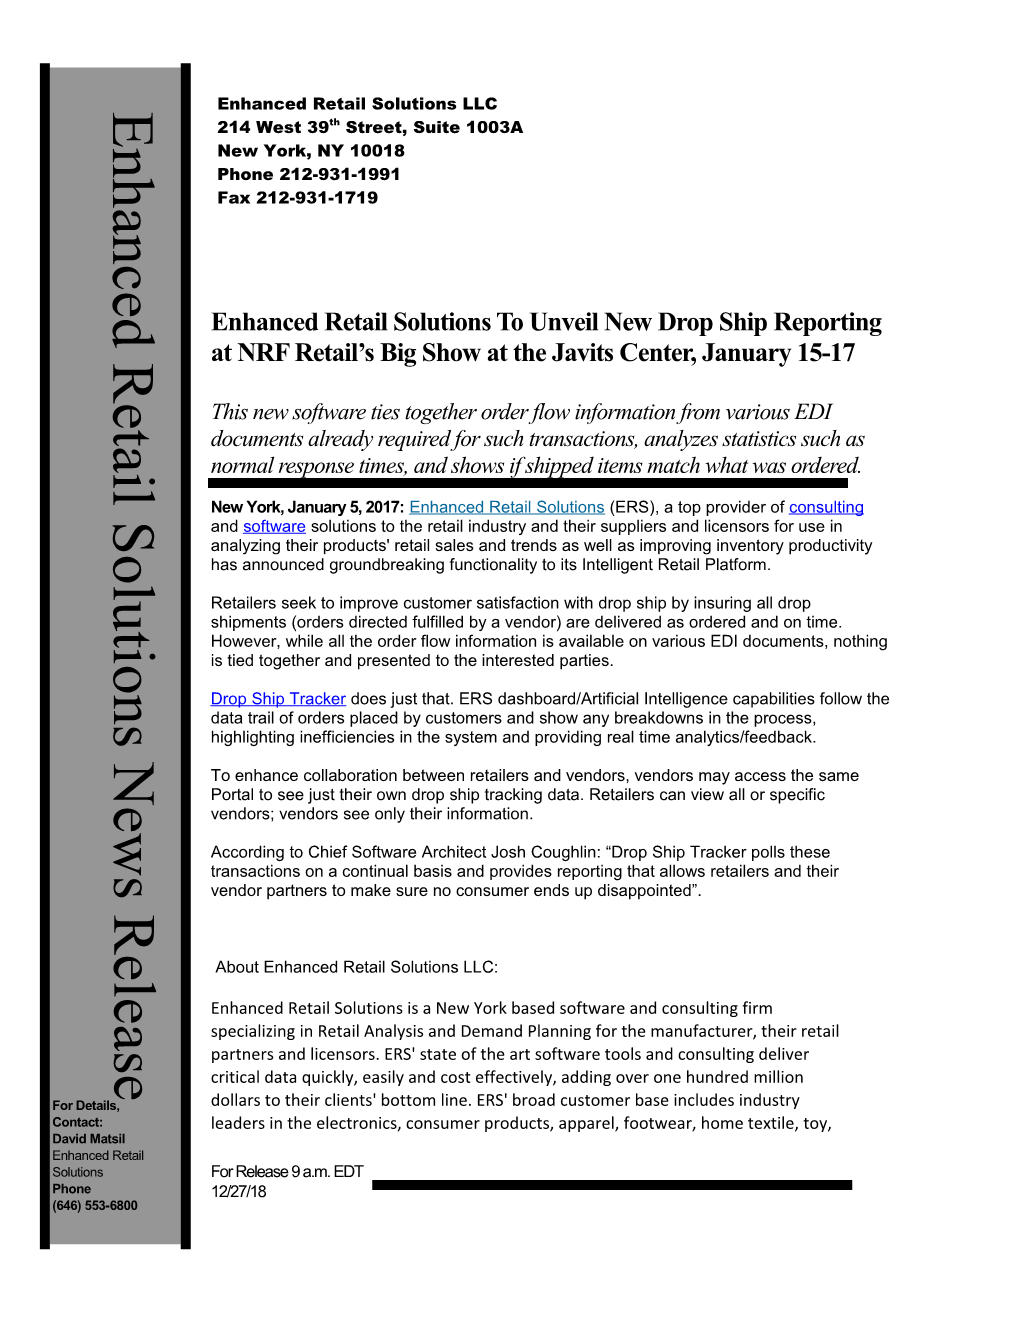 Enhanced Retail Solutions News Releasepage 1